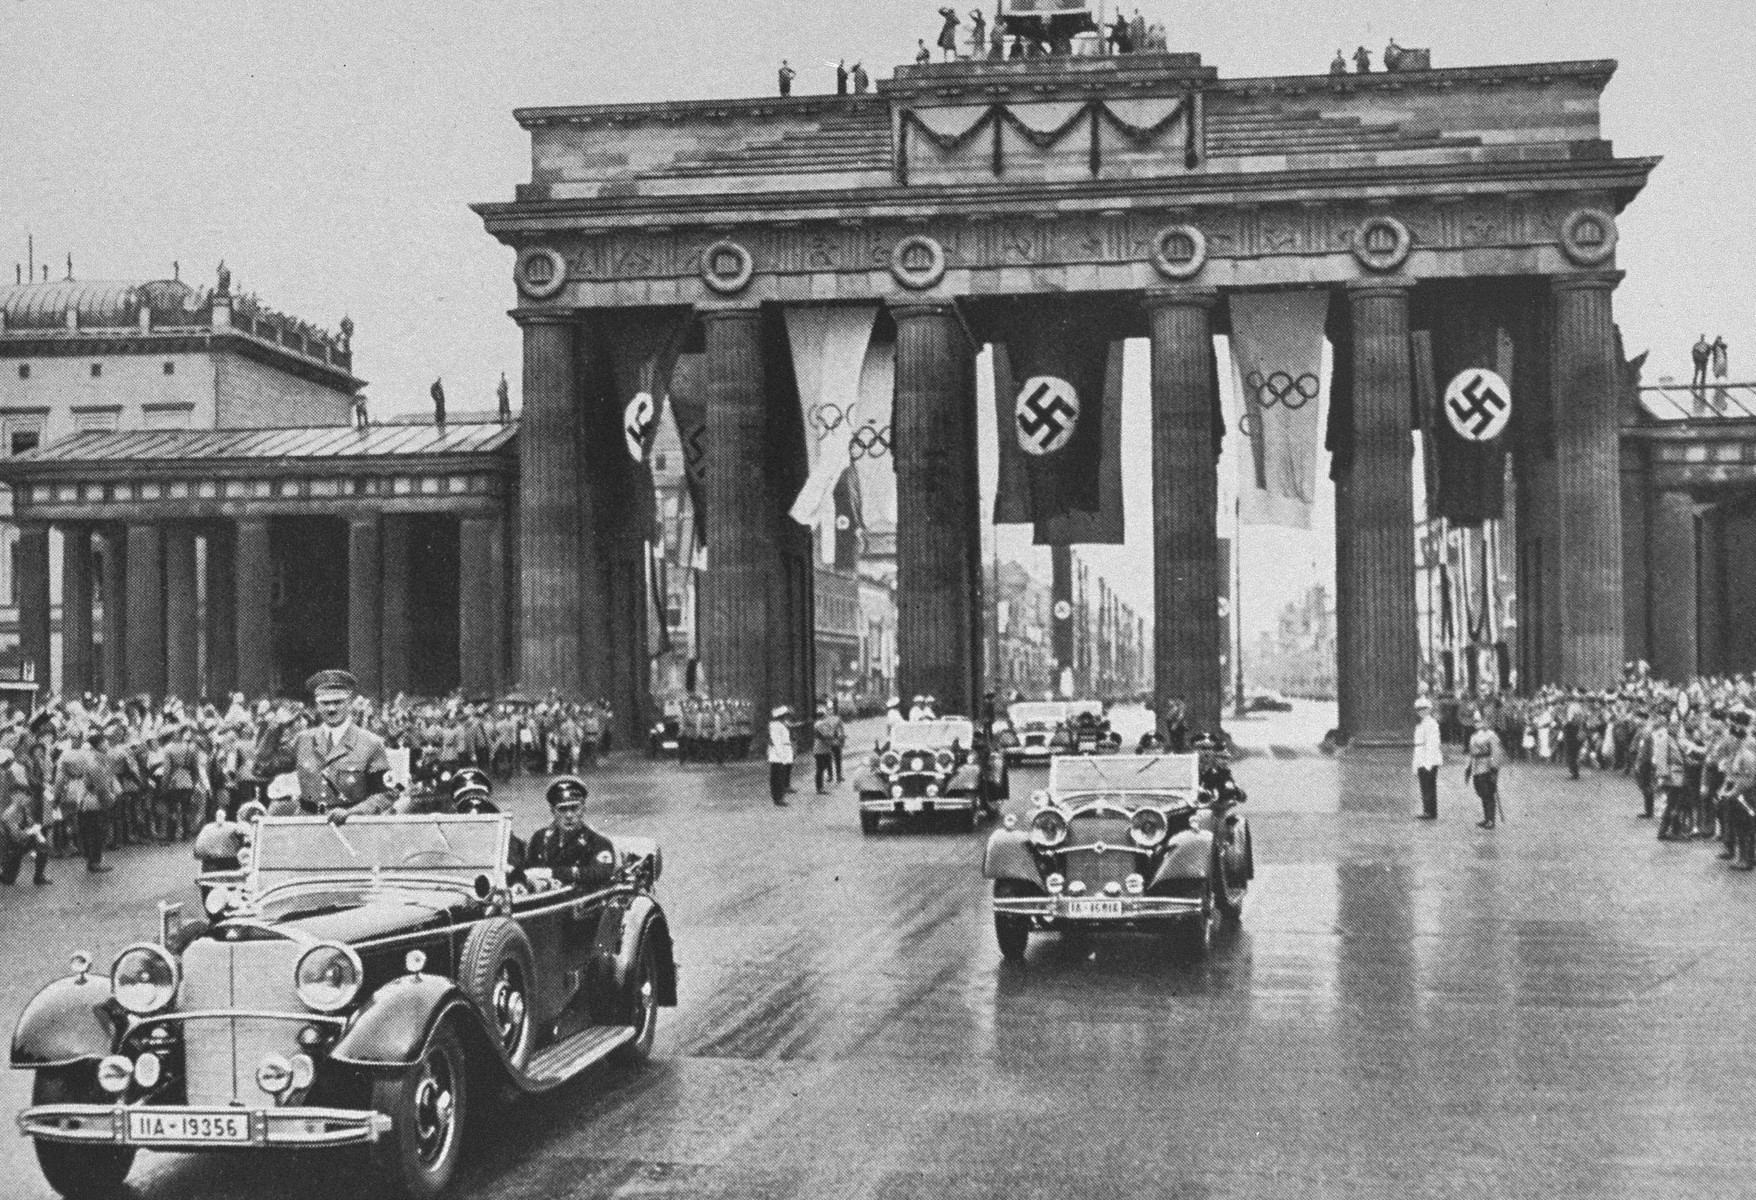 Adolf Hitler crosses Berlin in his car on his way to the Olympic stadium for the opening of the 1936 Olympic games 